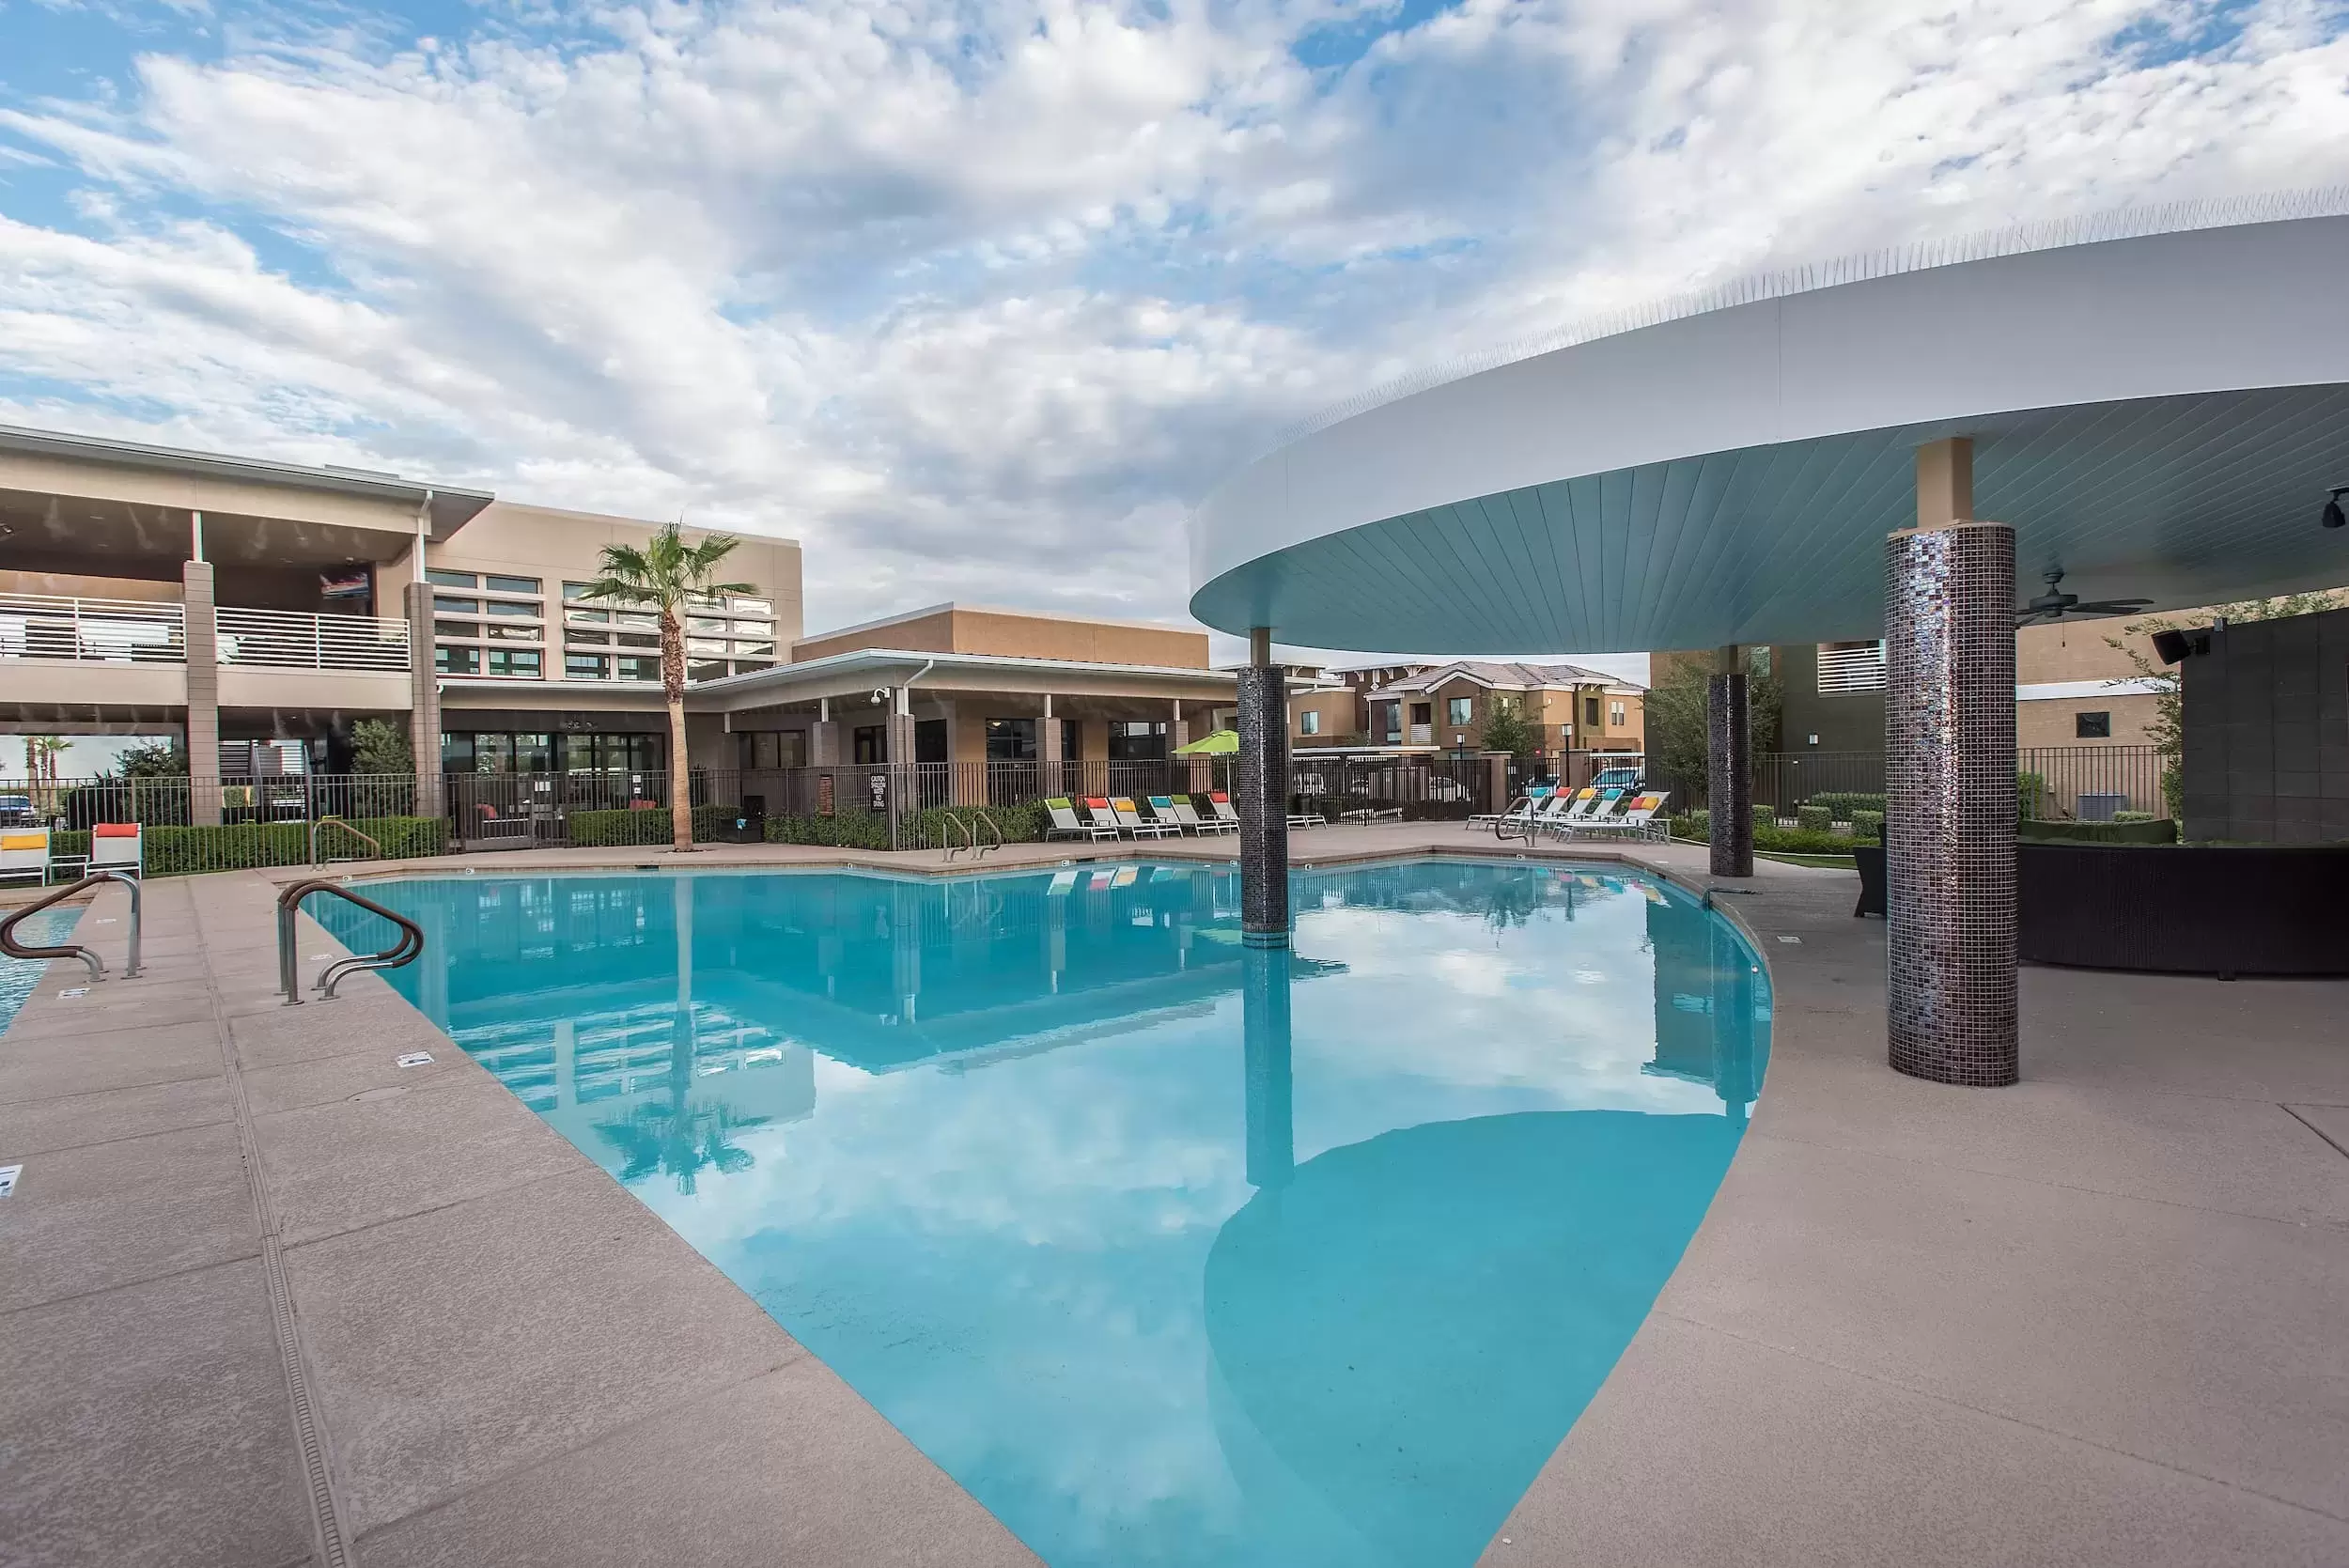 The pool and patio for the Liv Northgate community.